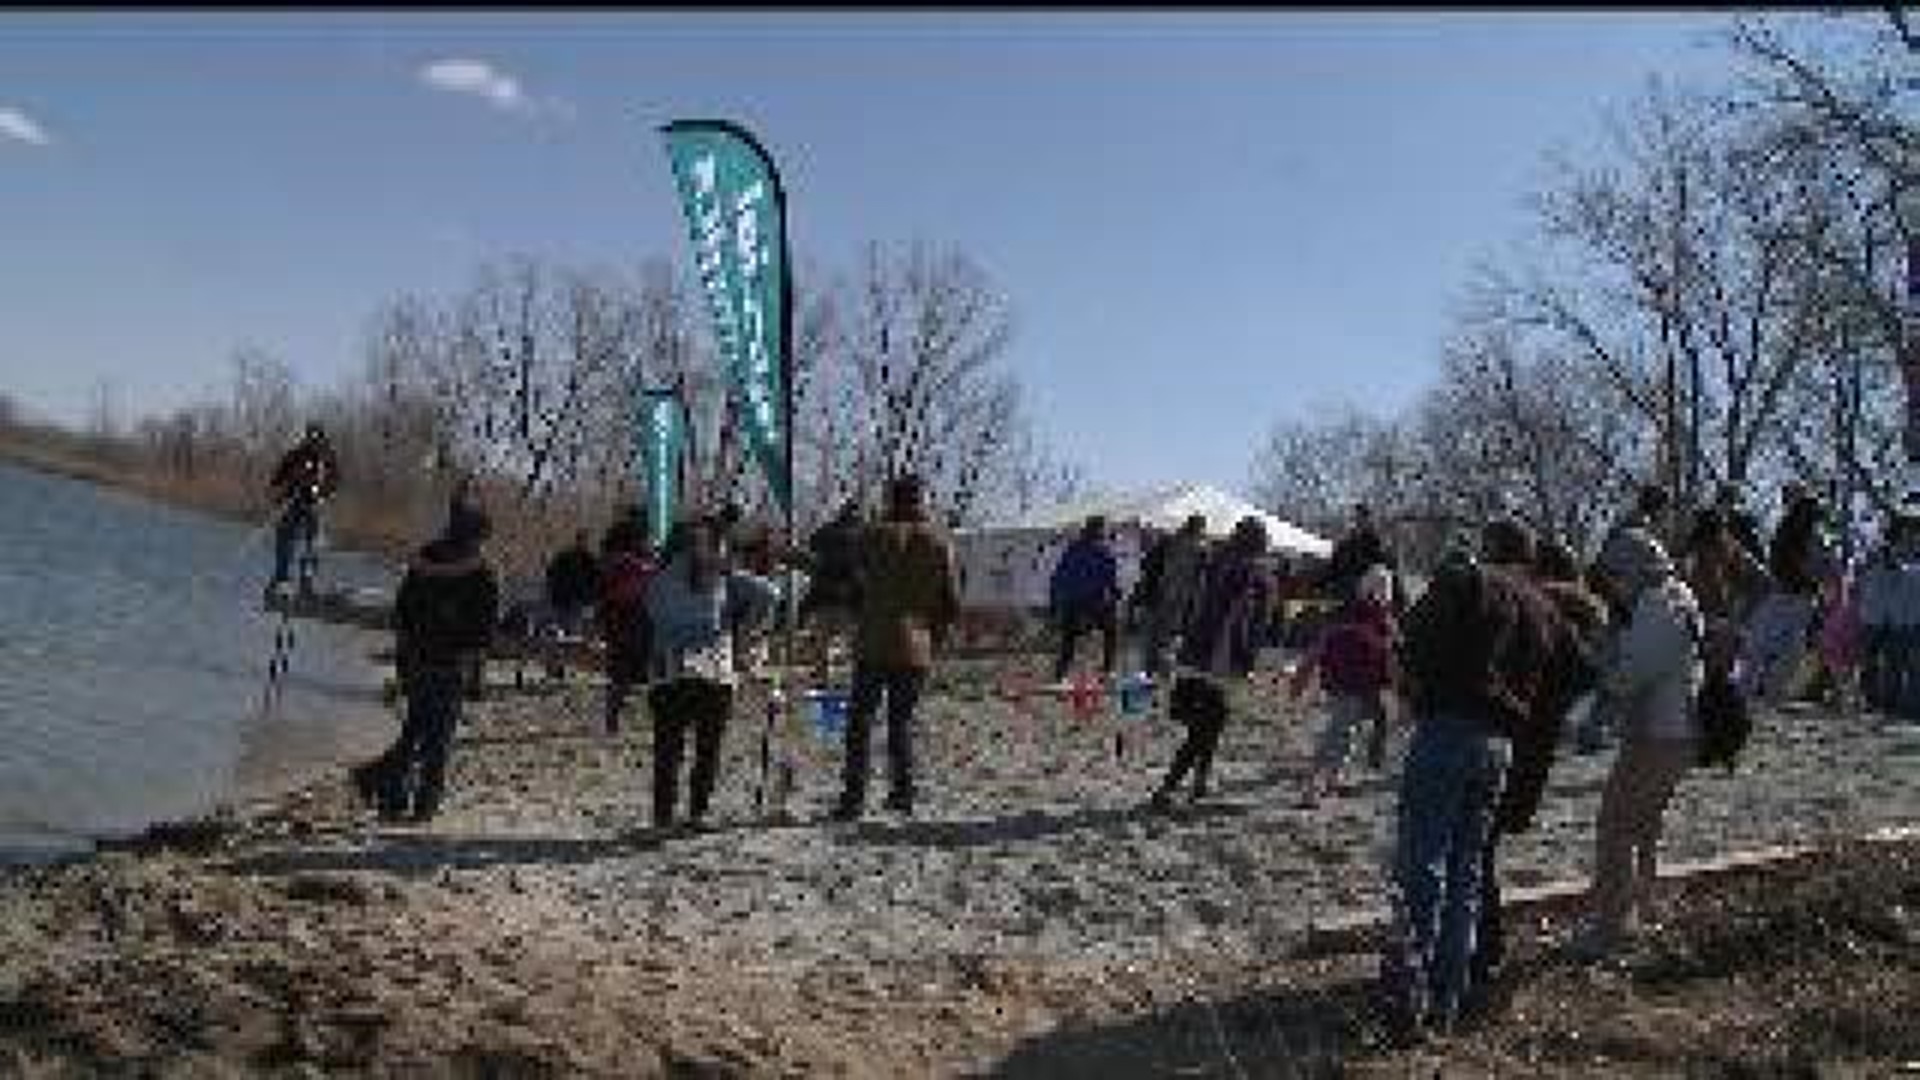 Chilly day for Polar Plunge